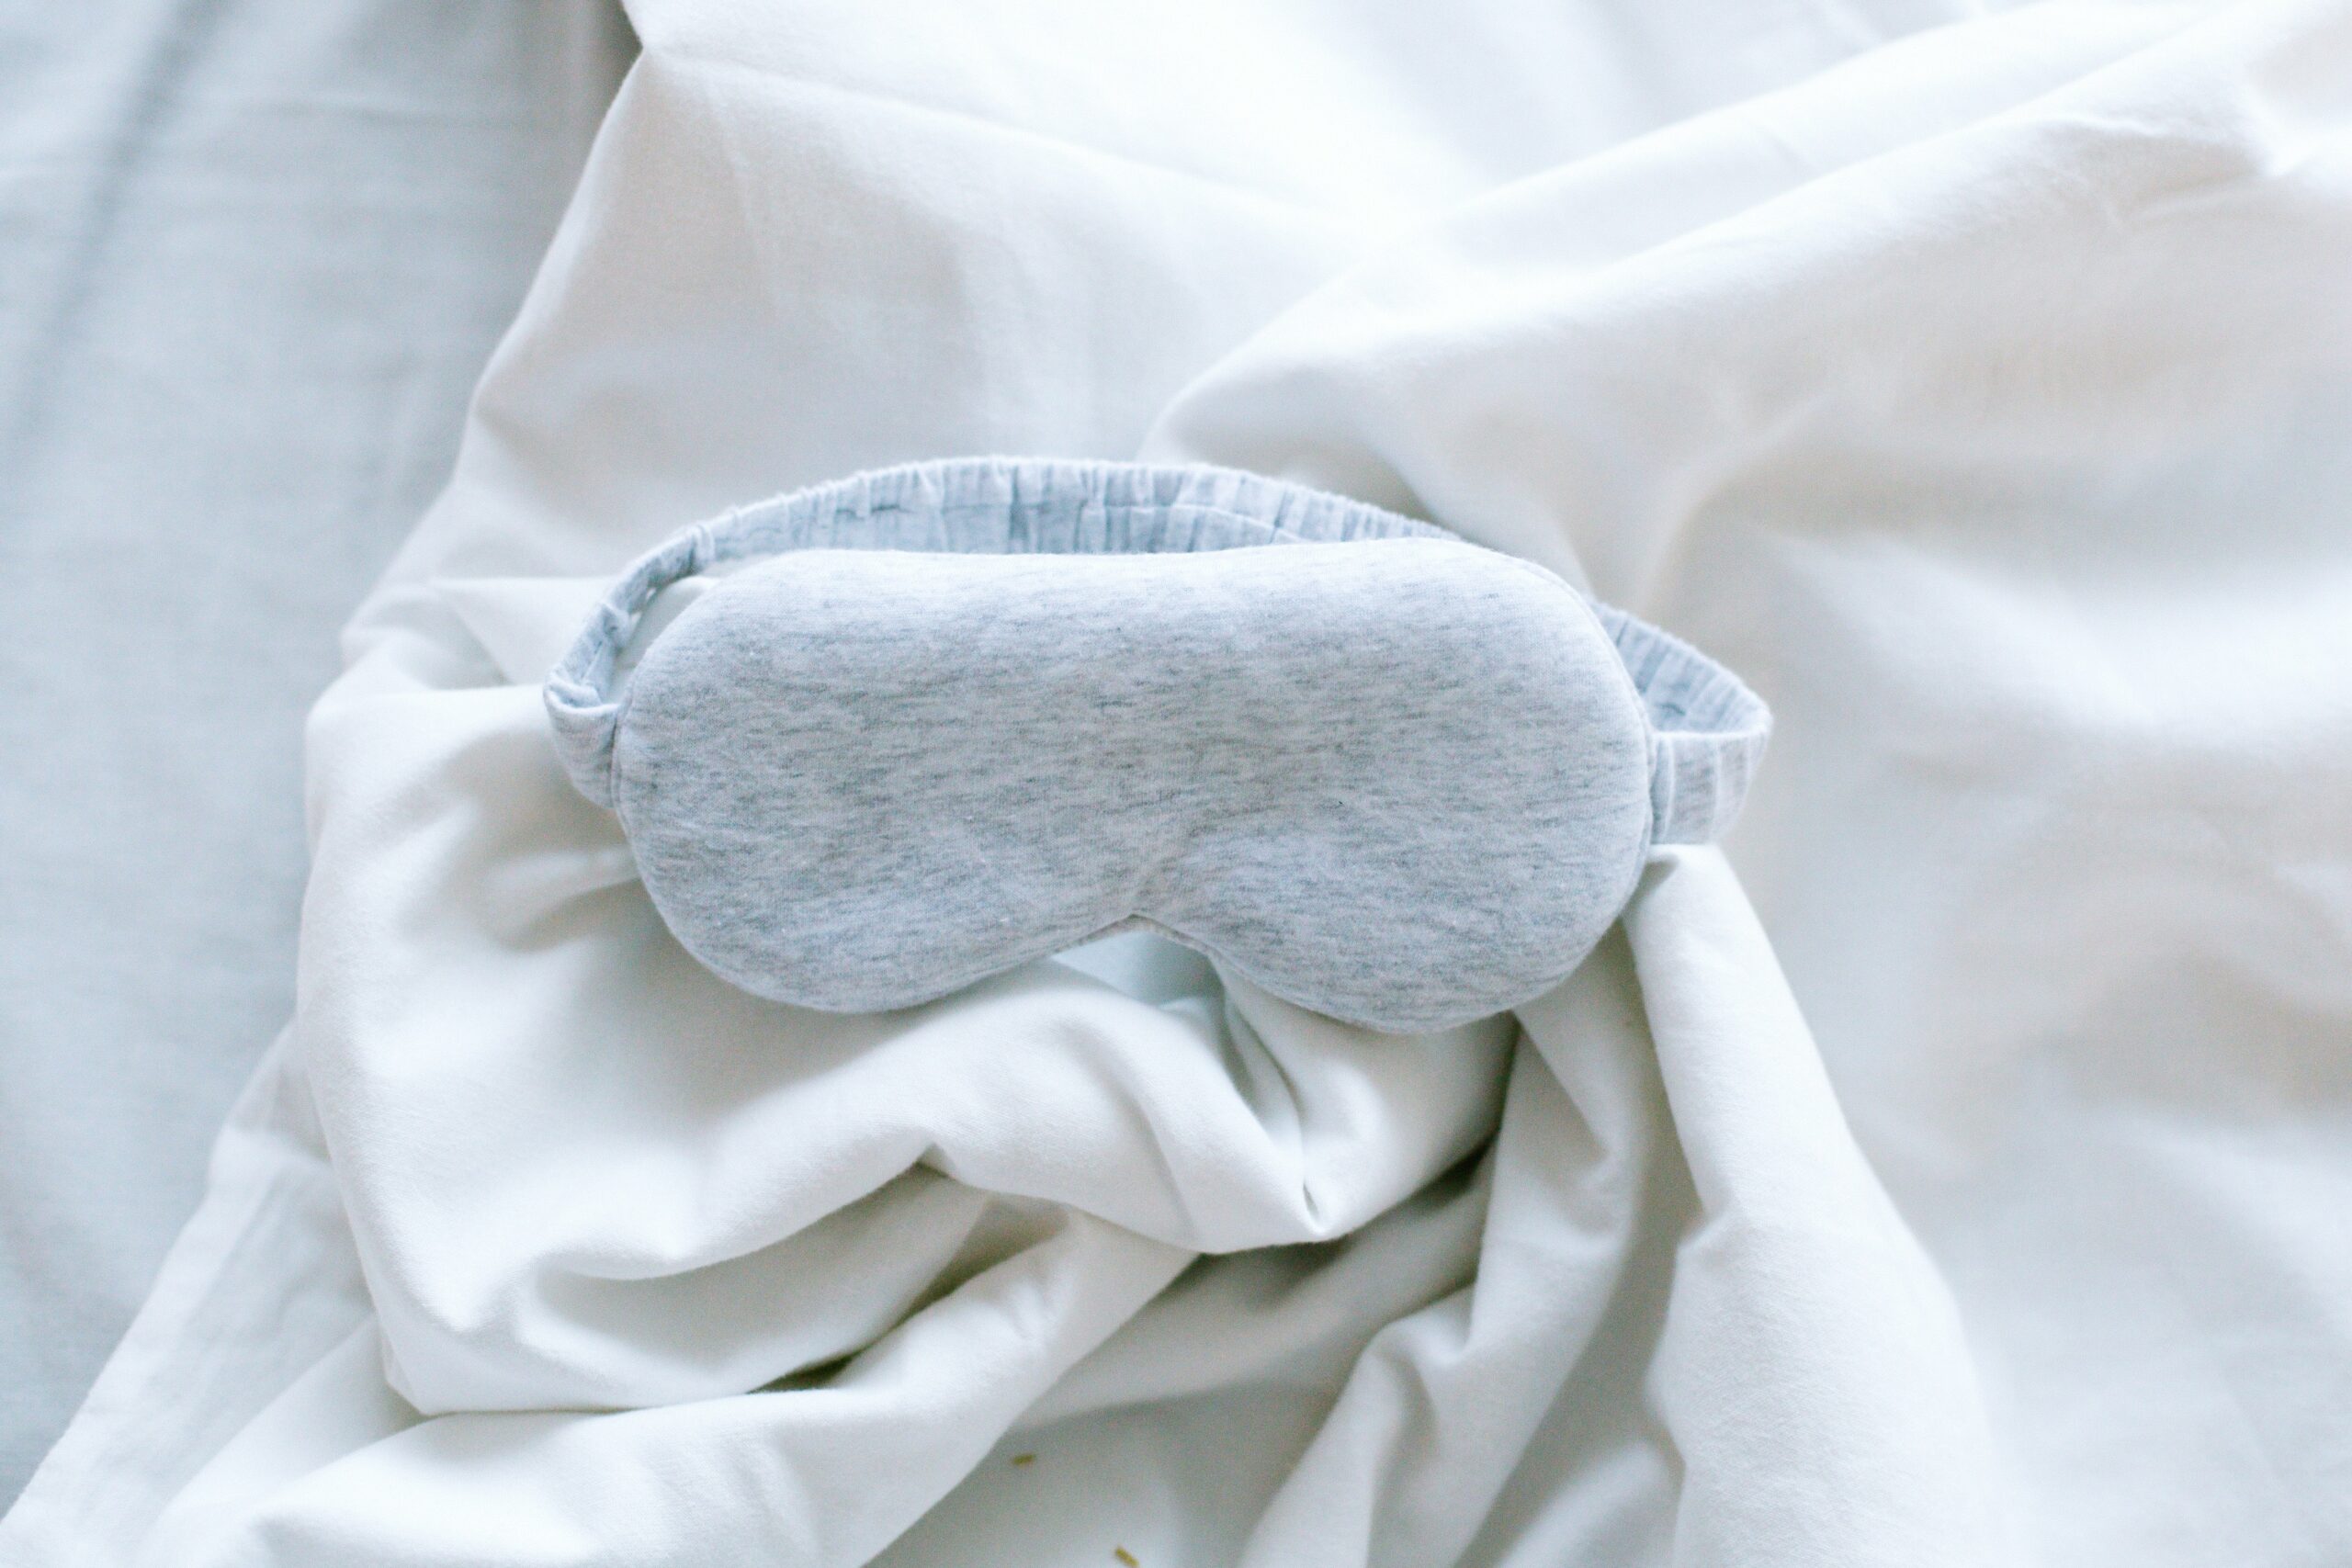 A sleeping mask on top of some sheets.